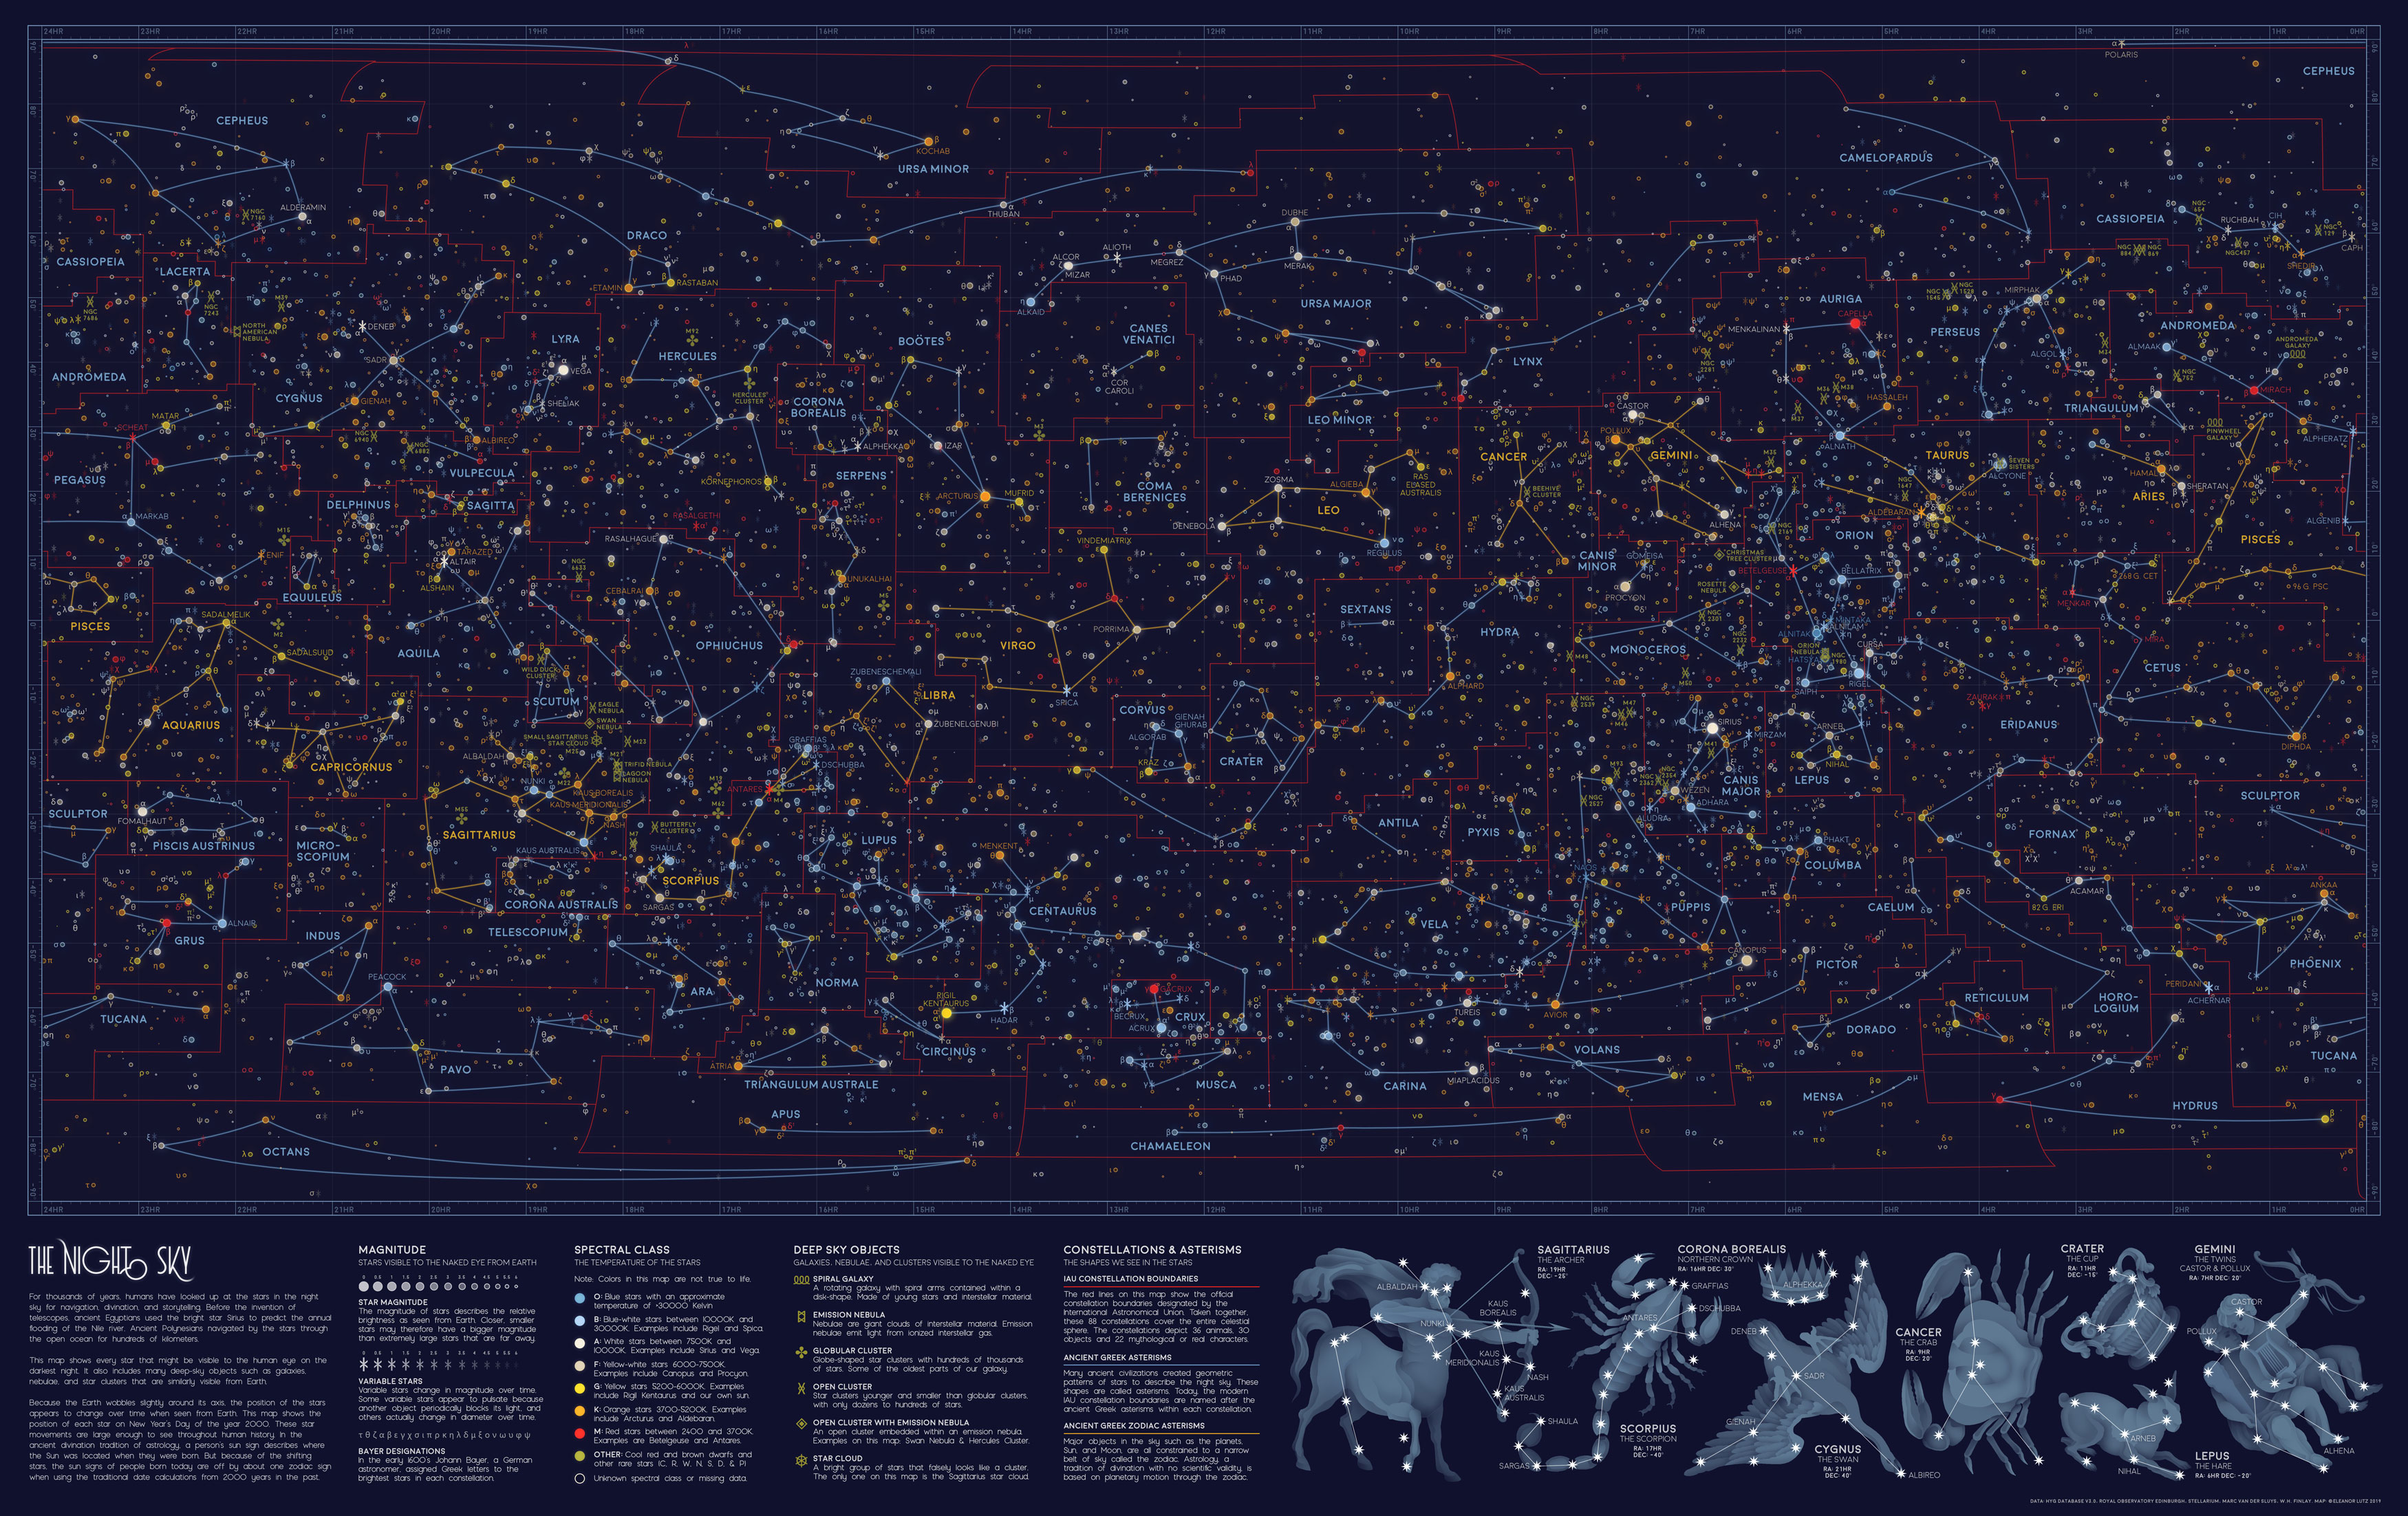 Every Visible Star in the Night Sky, in One Map